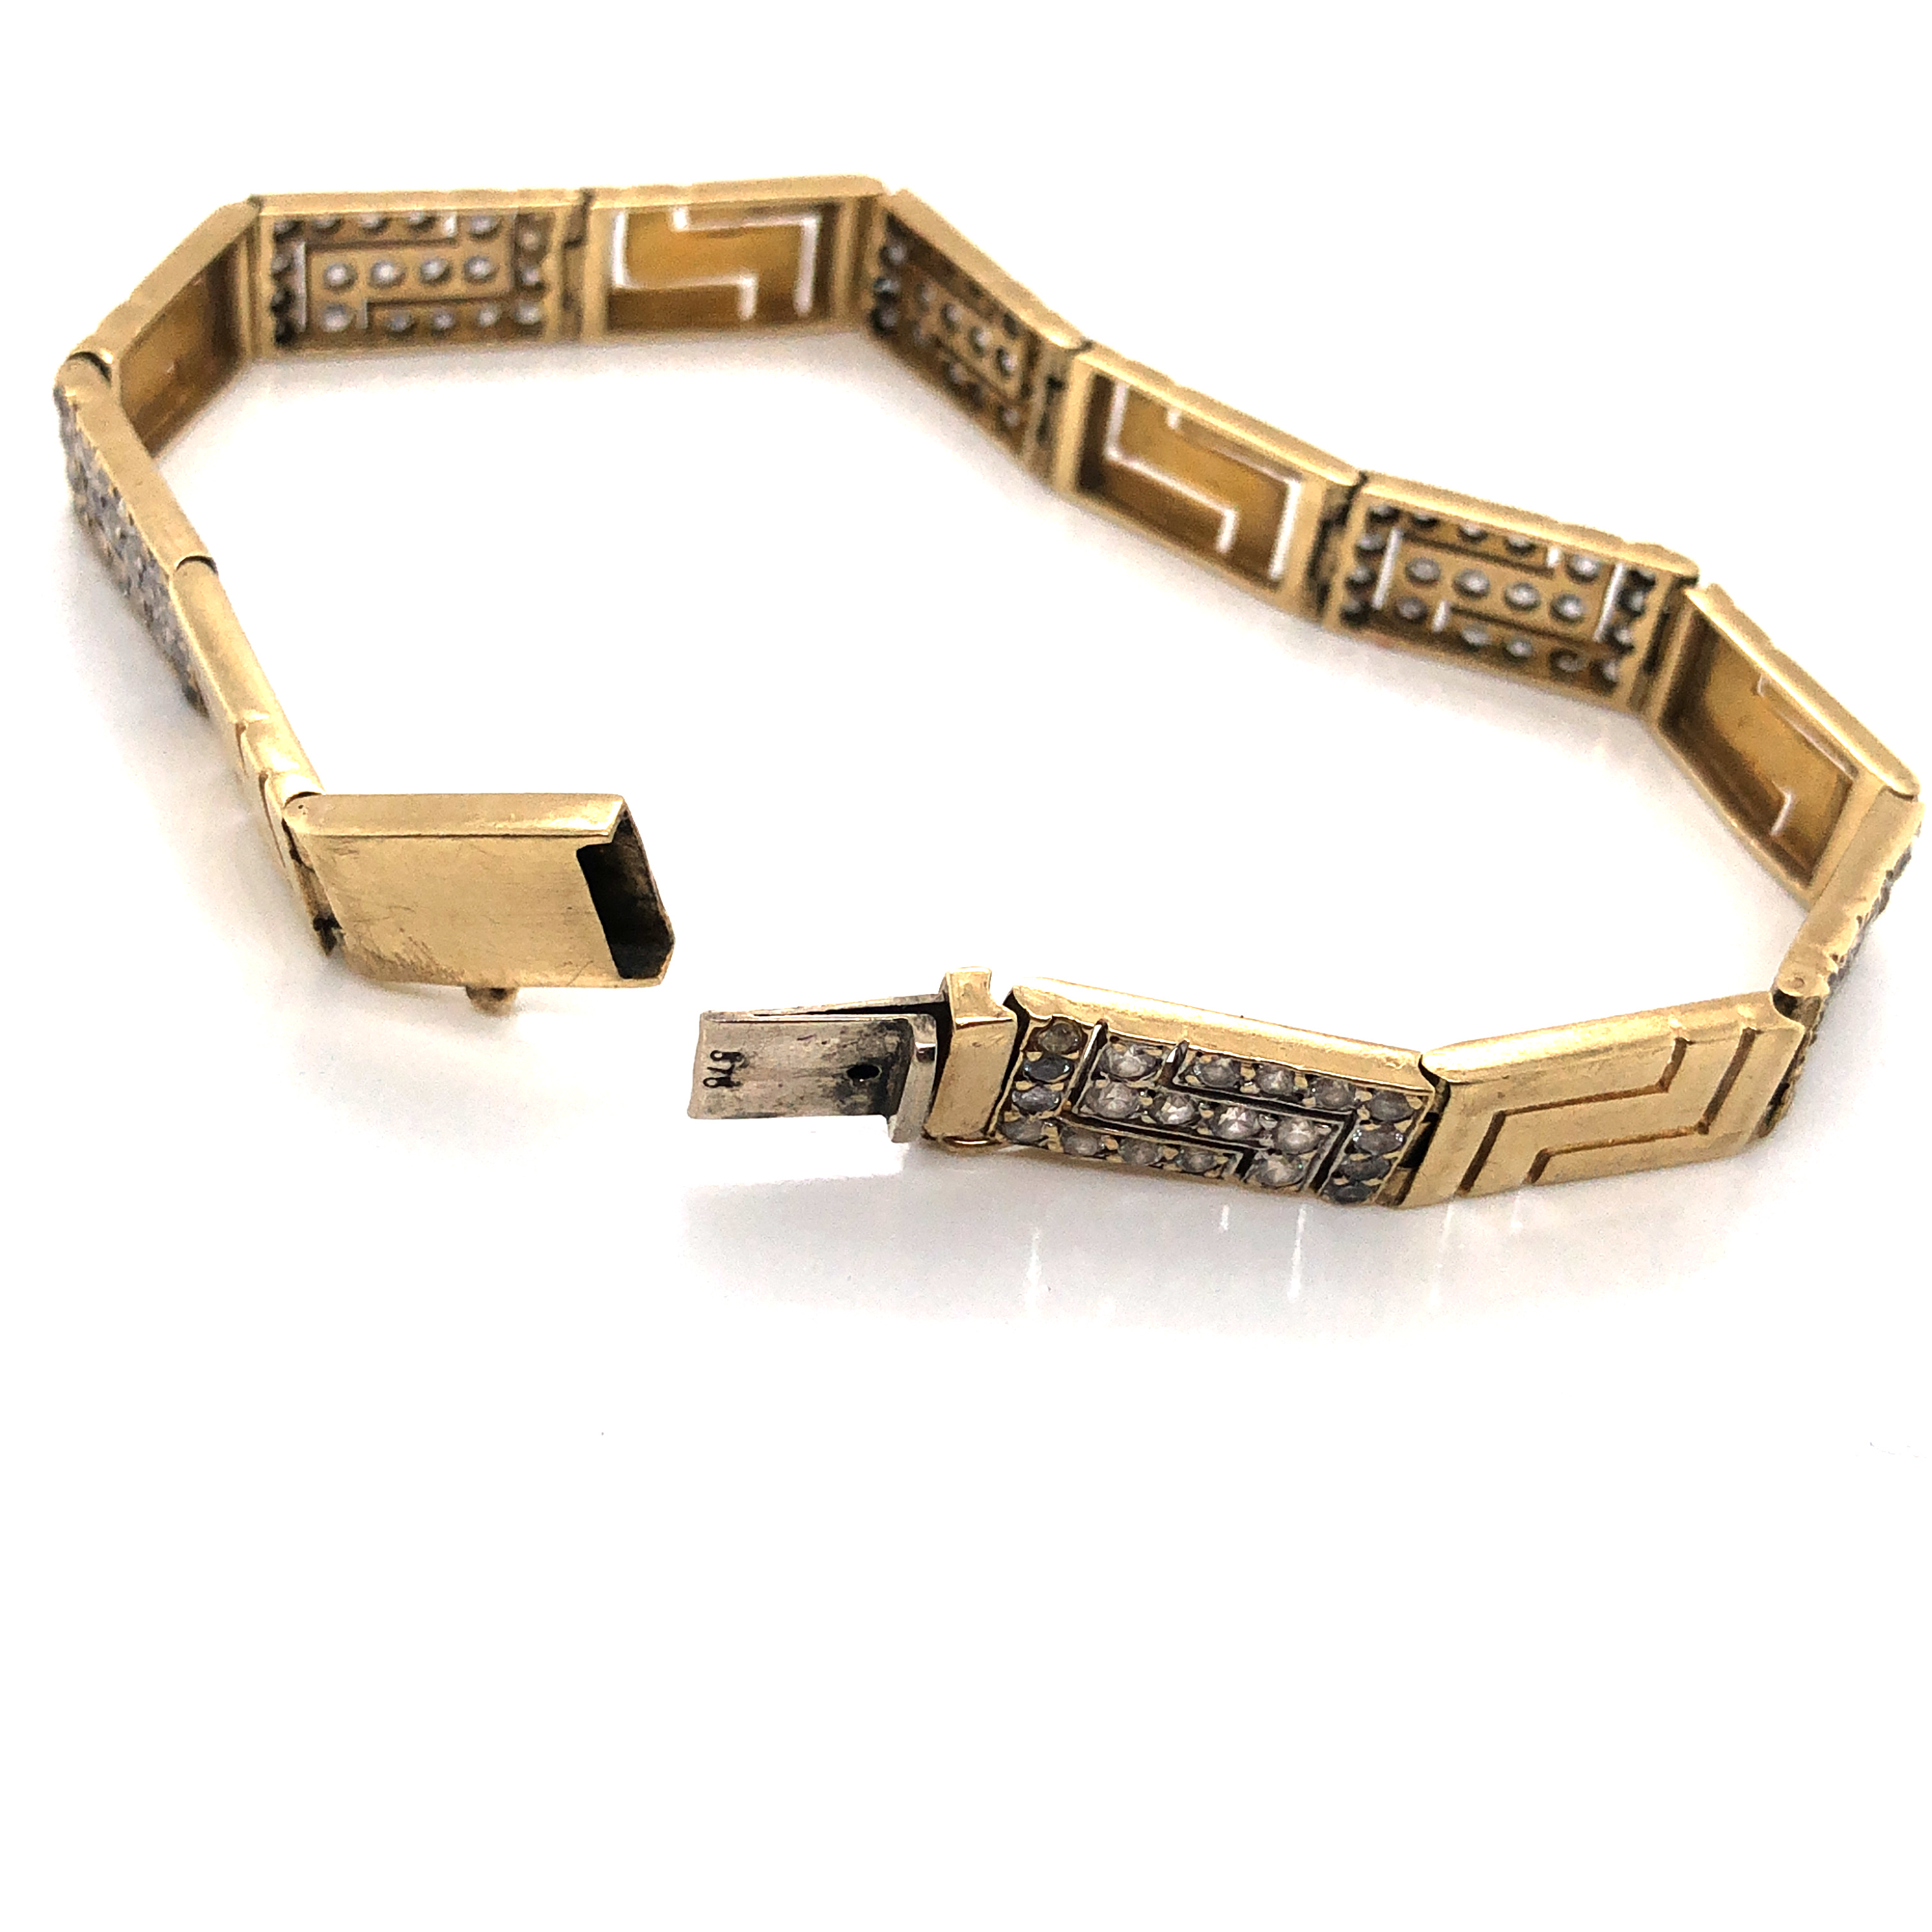 A 9ct HALLMARKED GOLD AND CUBIC ZIRCONIA PANEL BRACELET. SIGNED TOG. LENGTH 20cms. WEIGHT 16.6grms. - Image 2 of 3